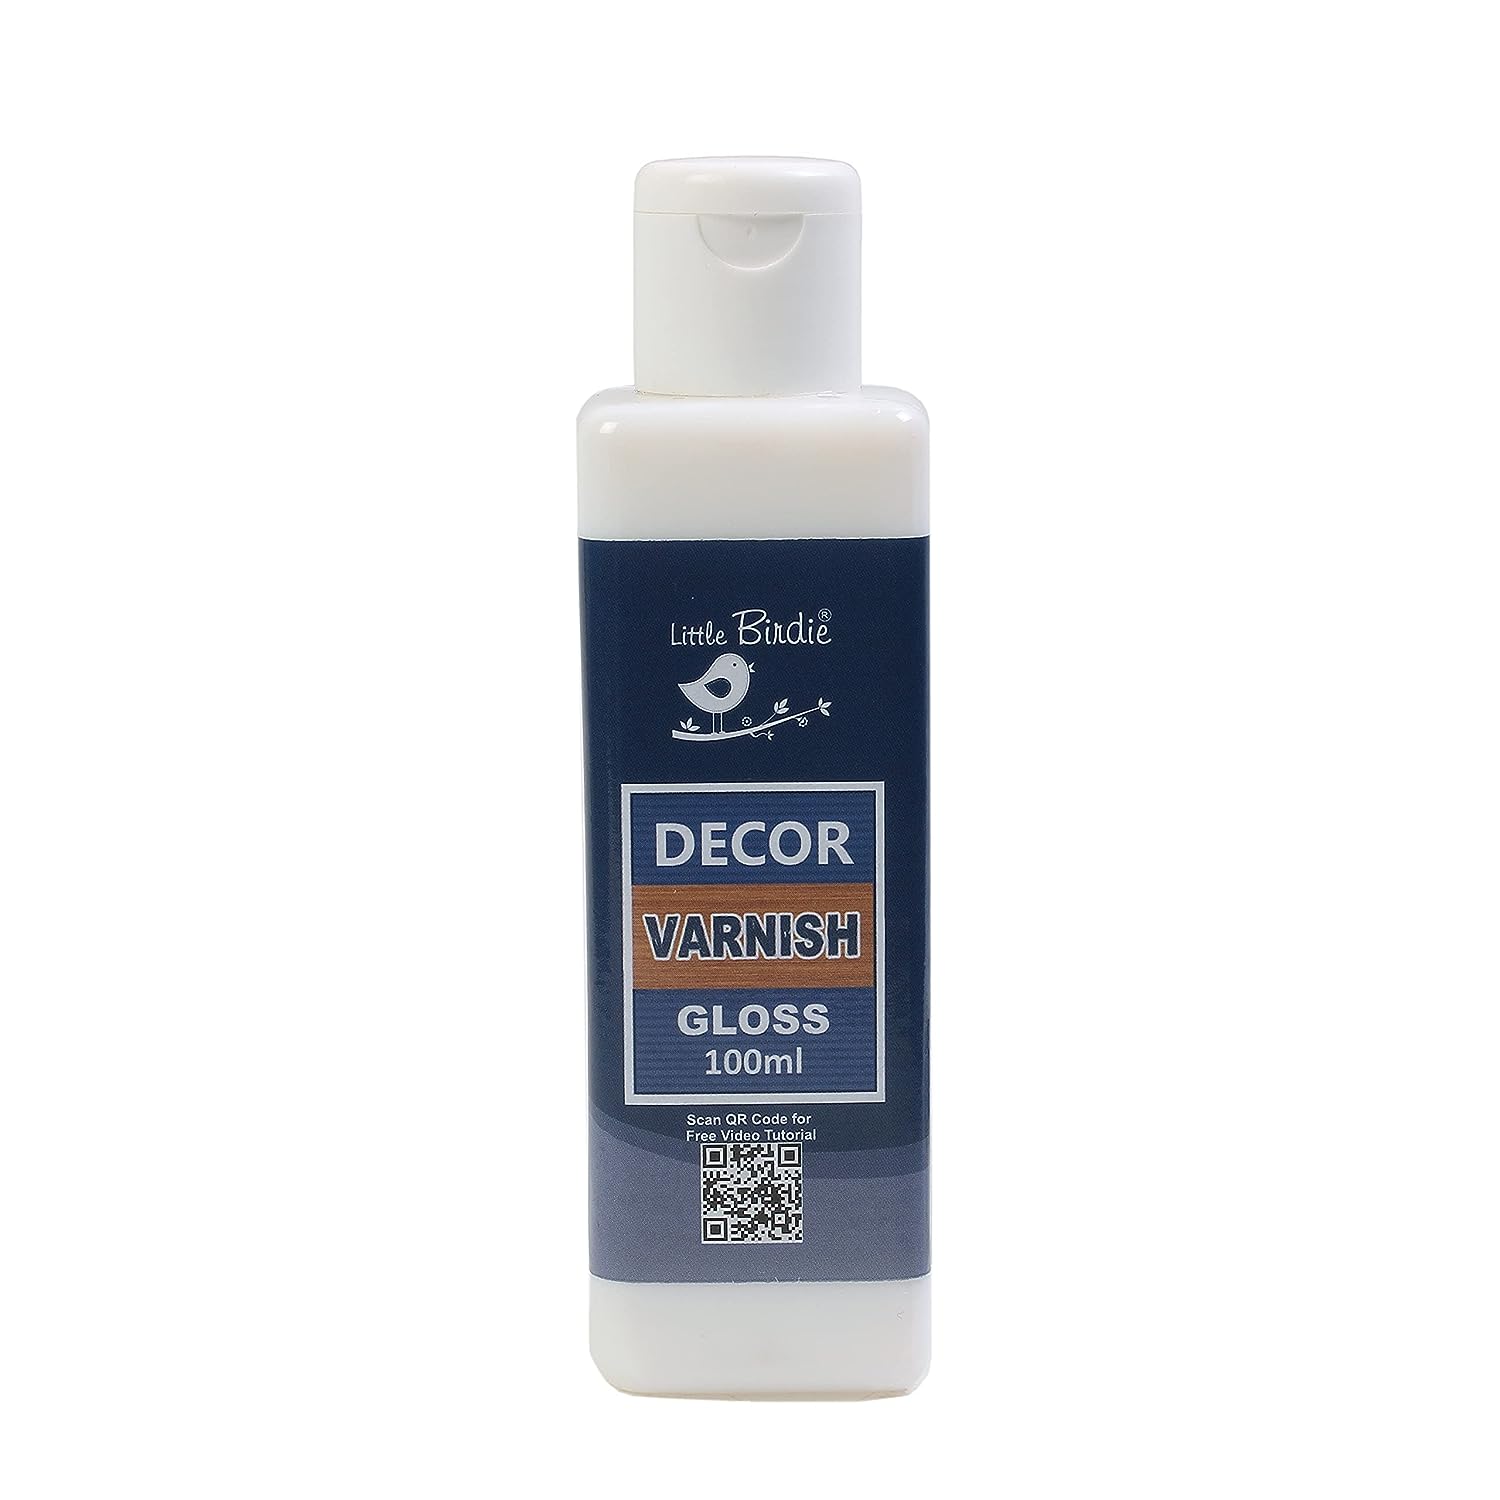 Decor Varnish Gloss 100Ml Bottle - Add 2 or more to the cart & get 1 Free